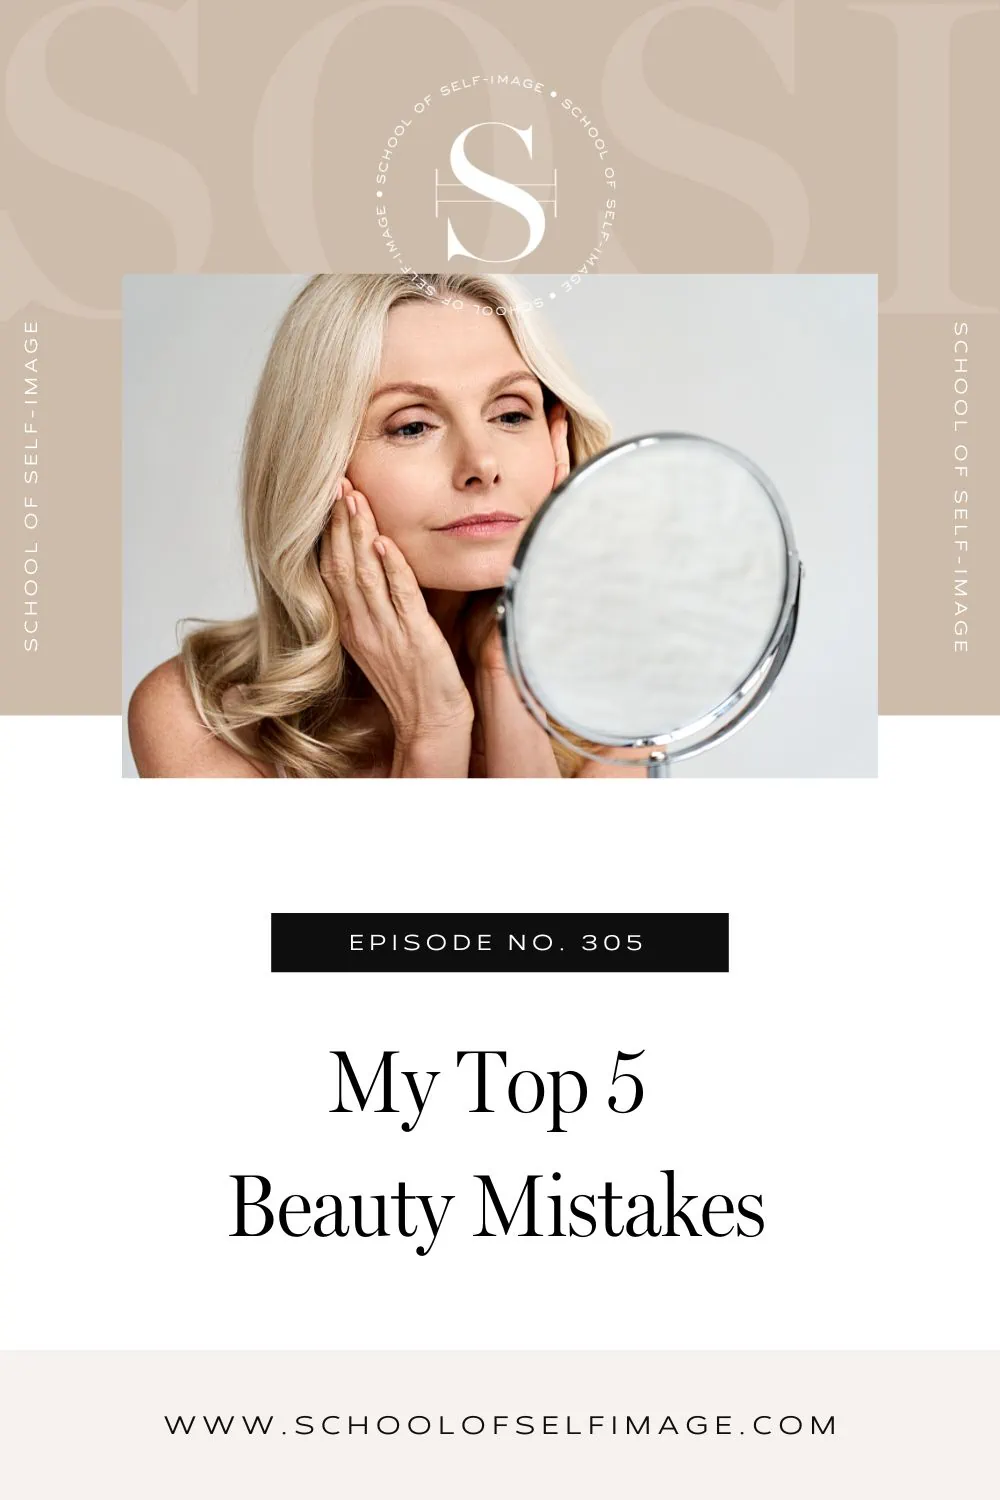 My Top 5 Beauty Mistakes